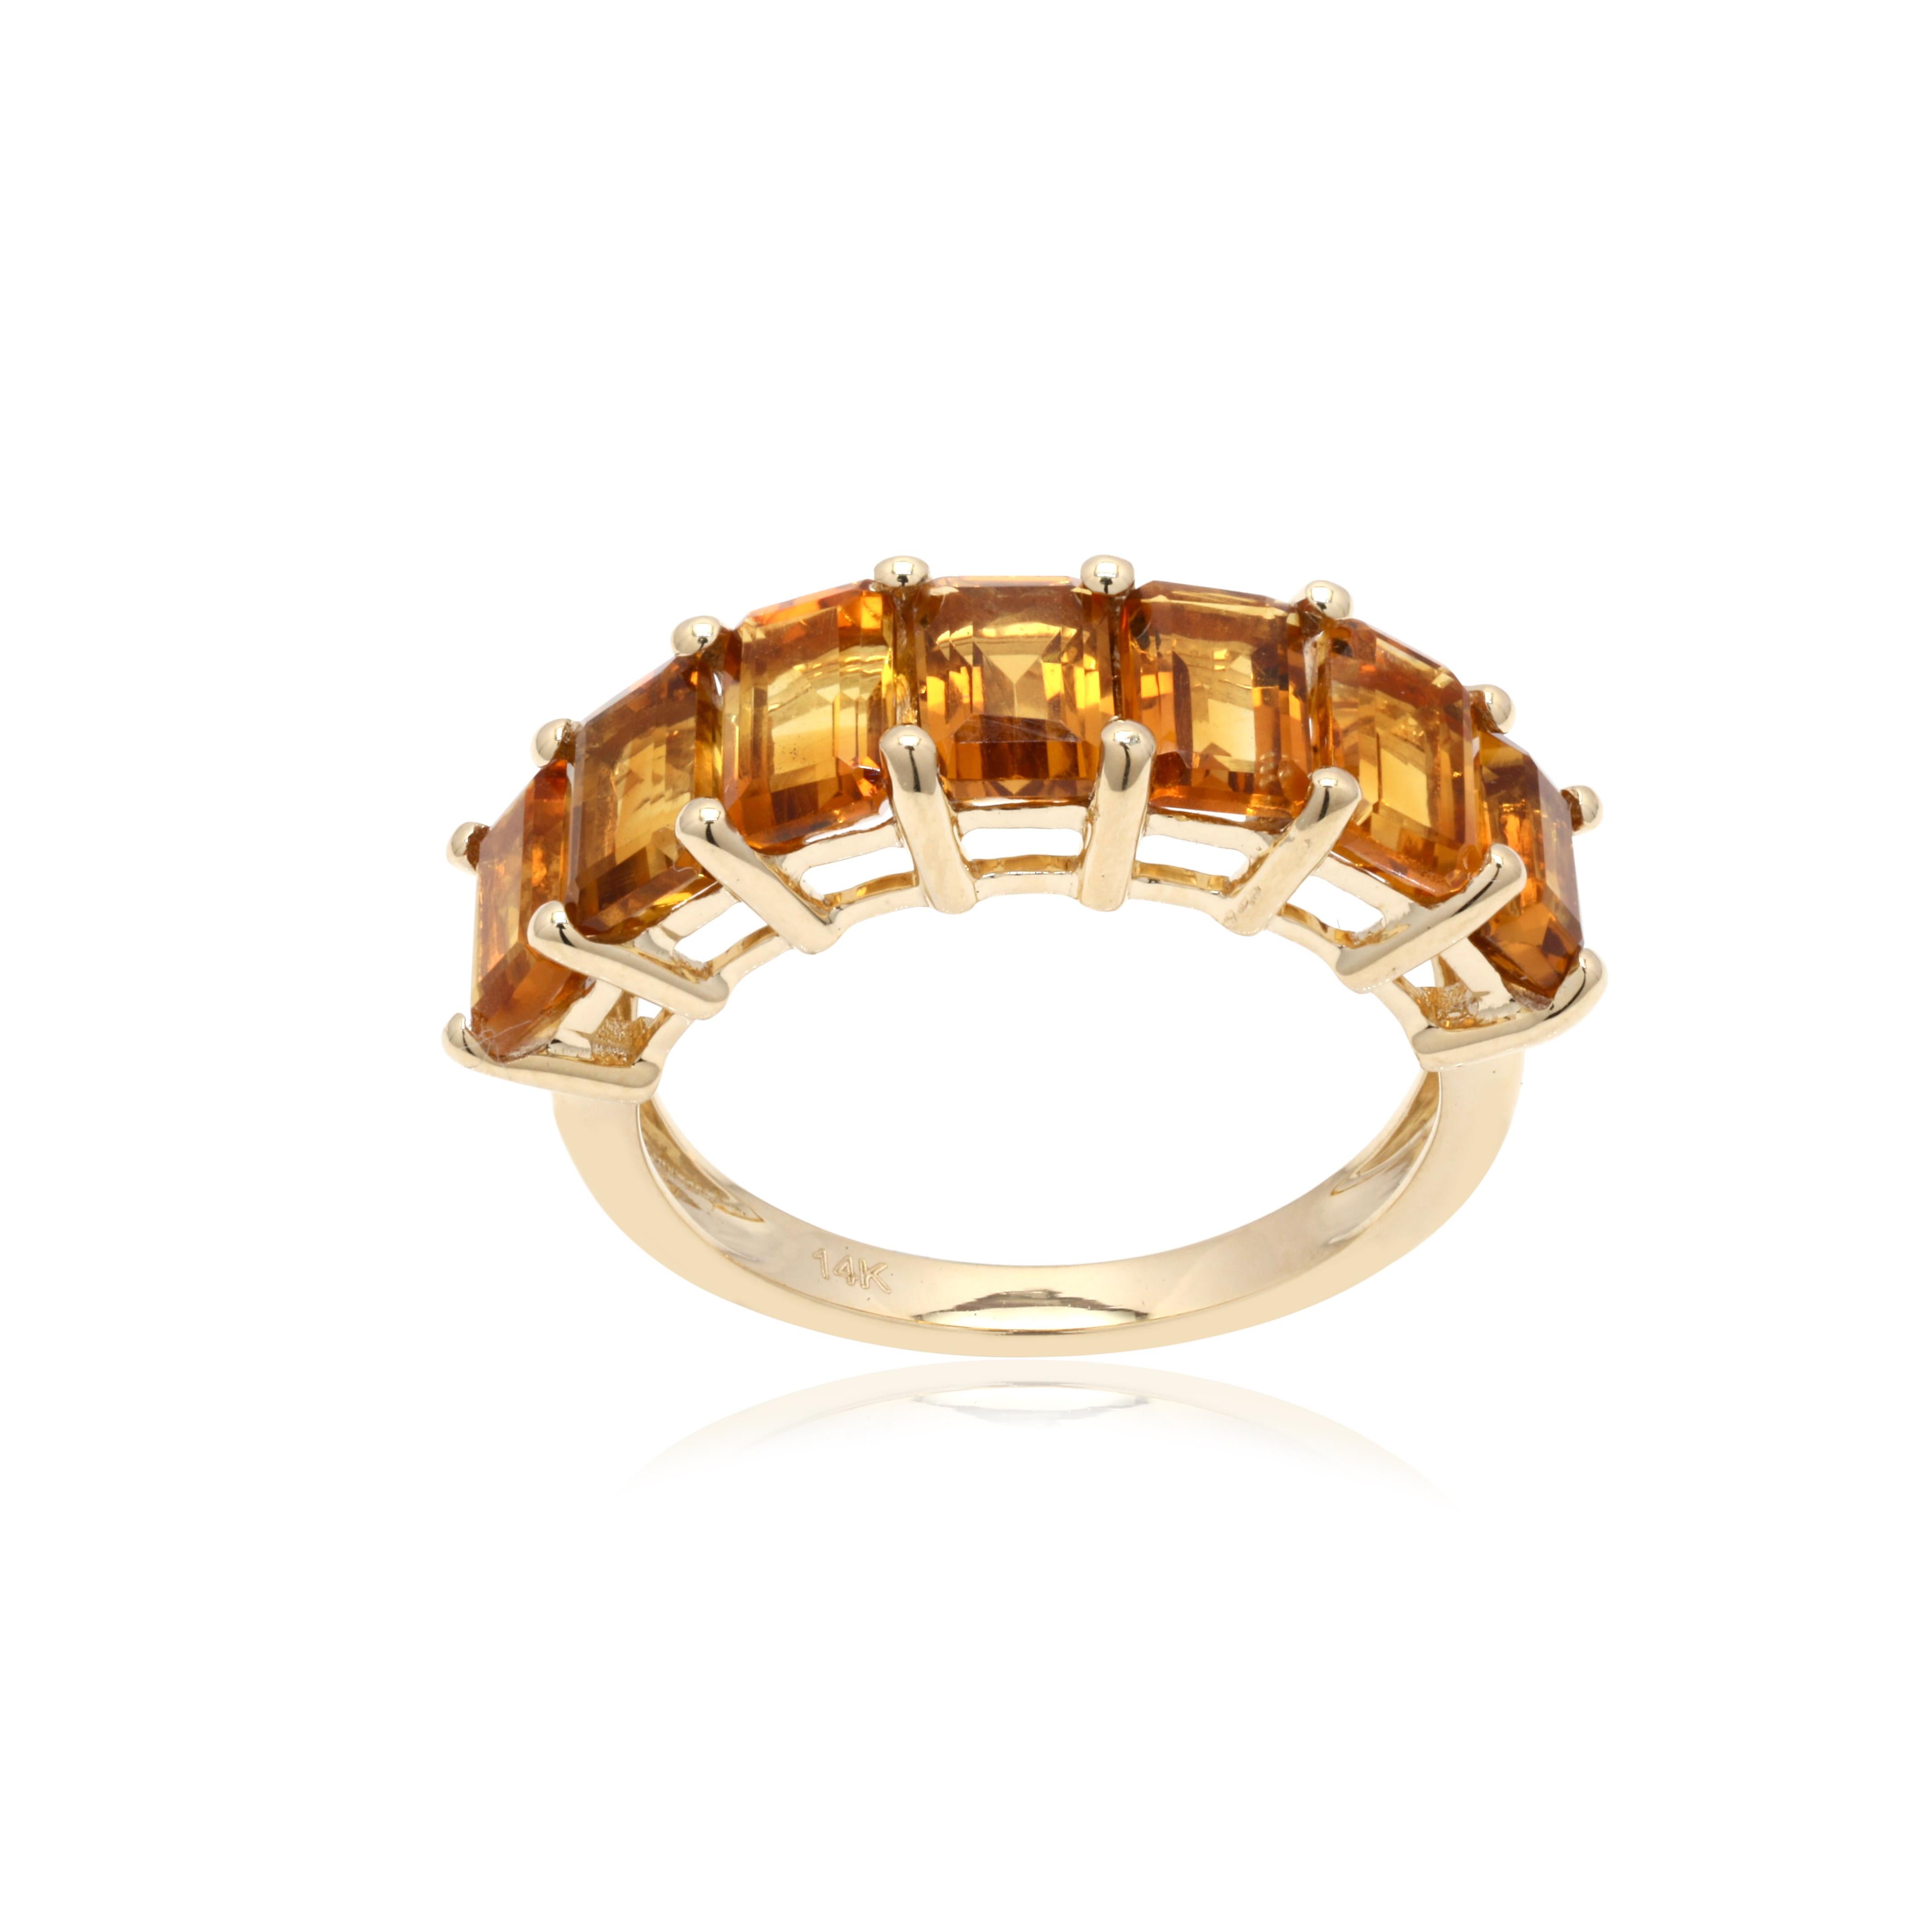 For Sale:  14K Solid Yellow Gold 3.83 Ct Citrine Gemstone Half Eternity Band Ring 2